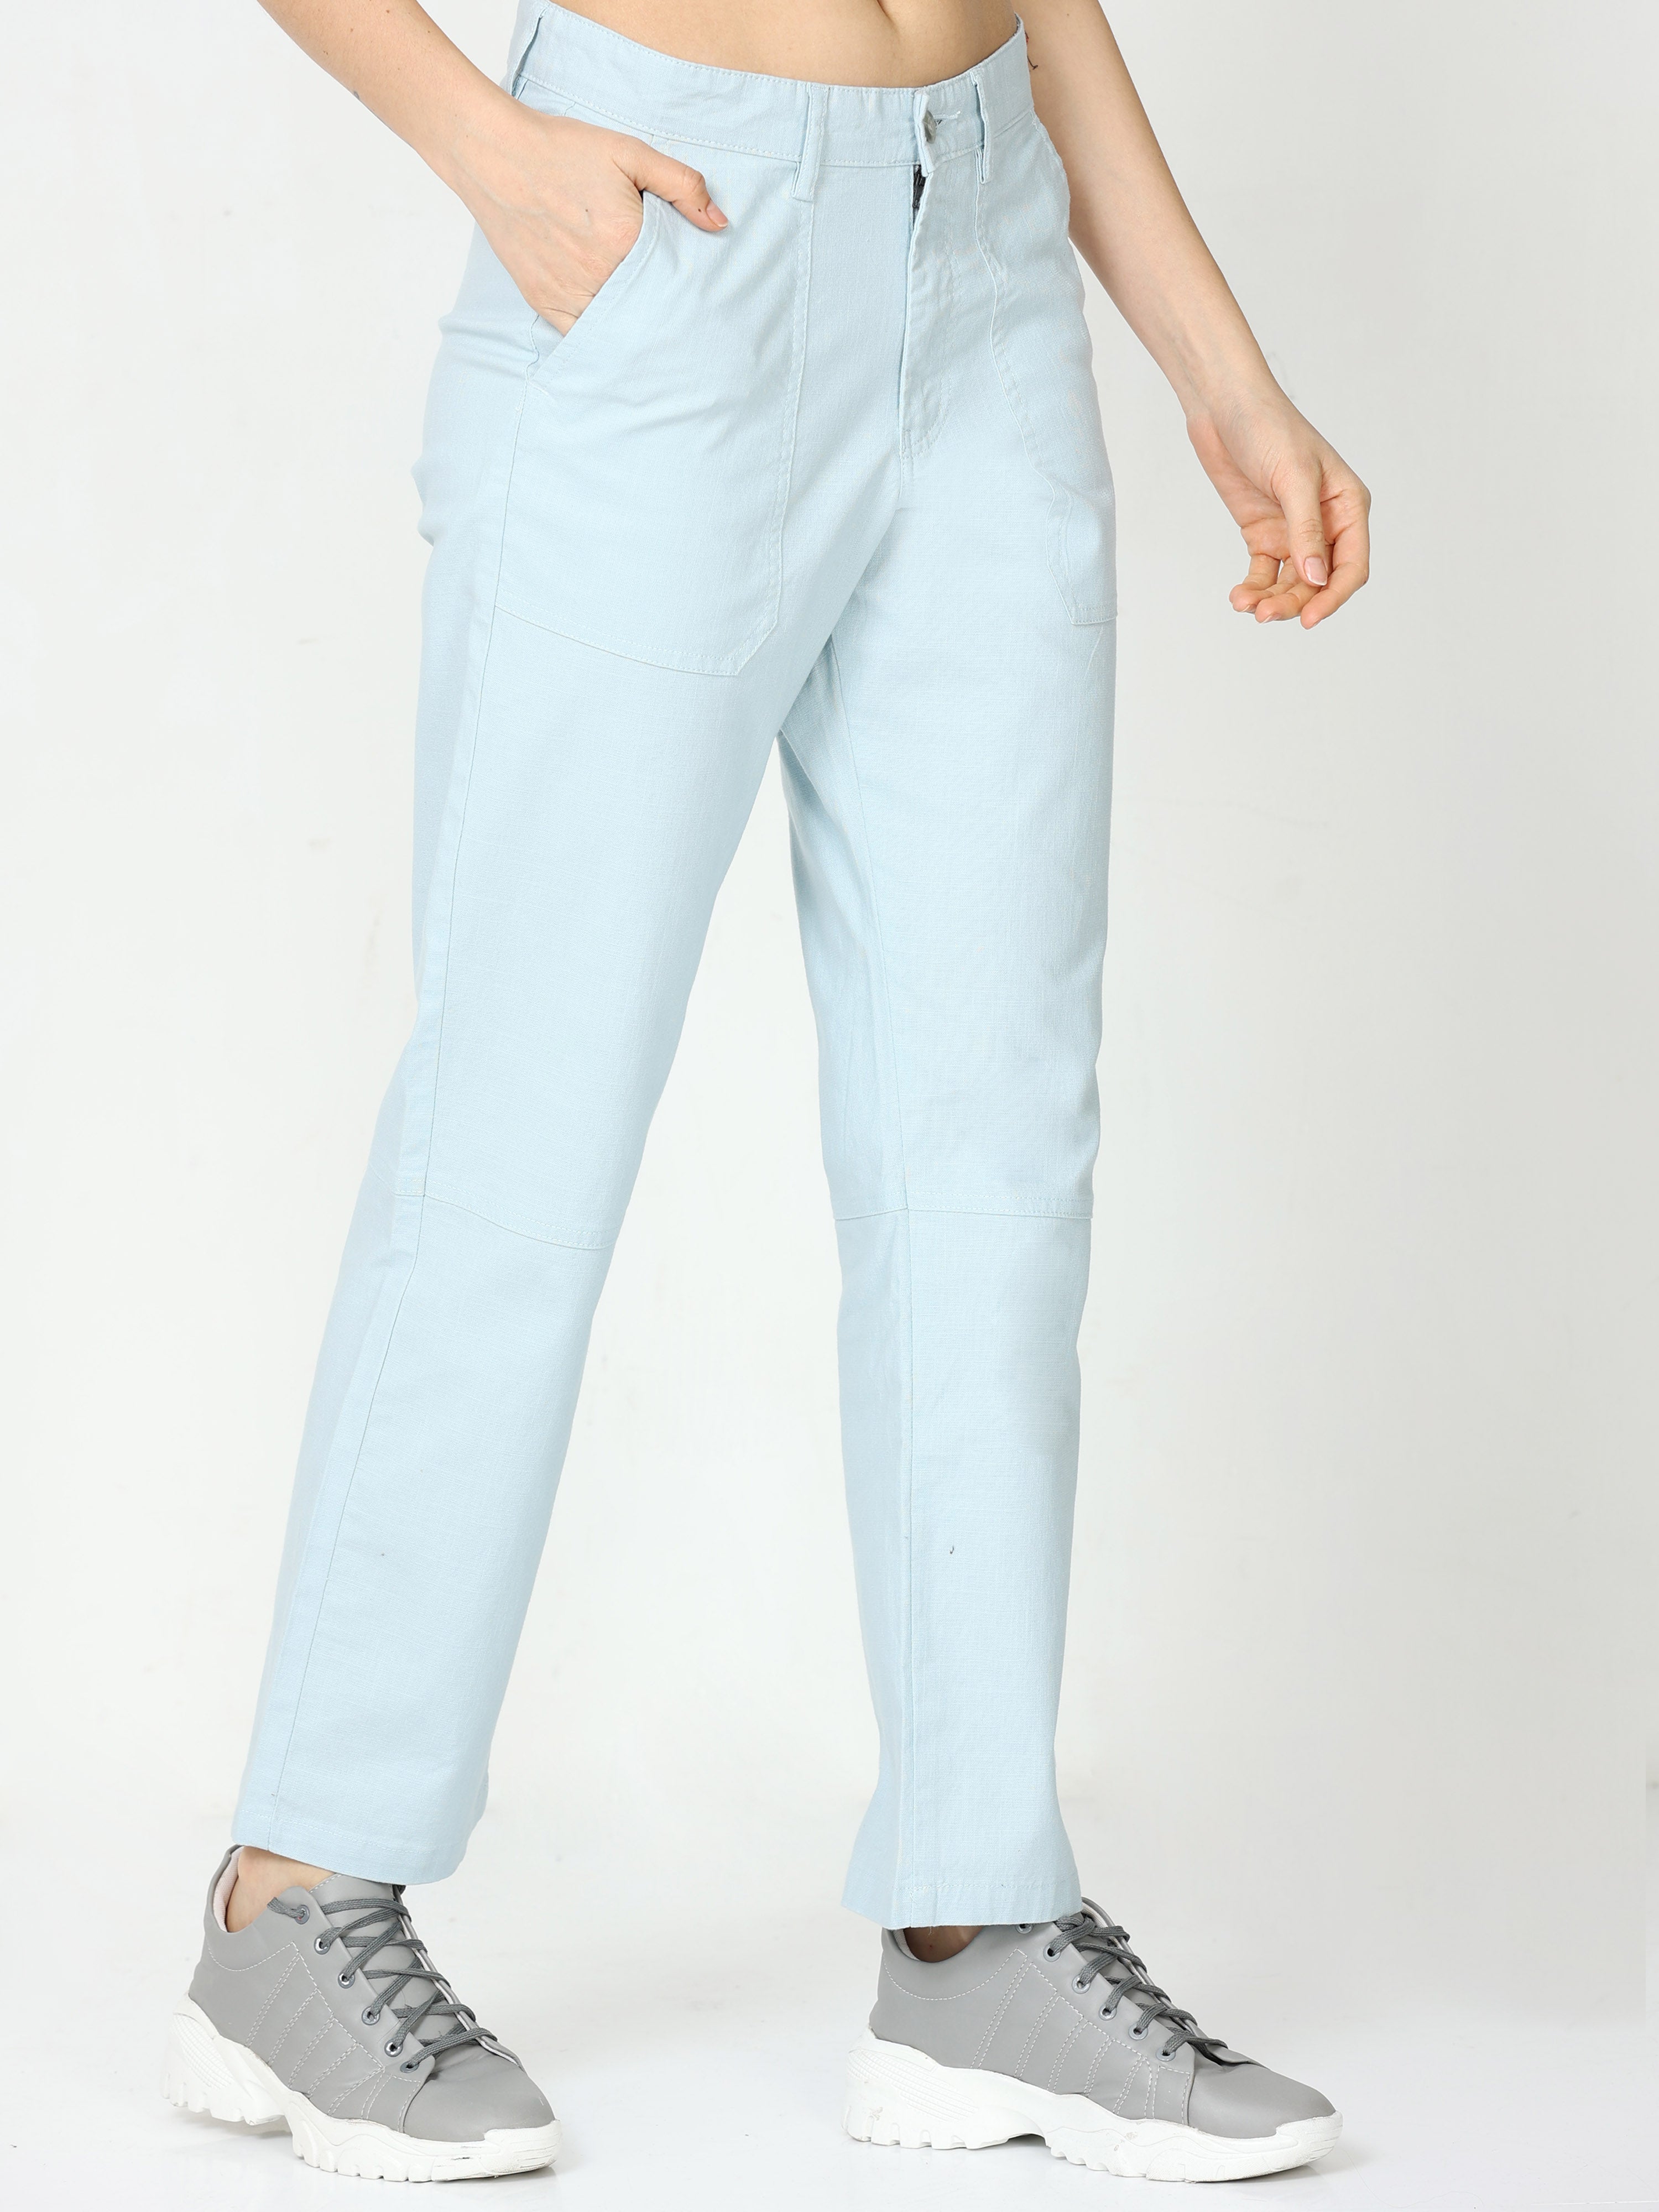 Ladies Linen Trousers Manufacturers, Suppliers, Dealers & Prices